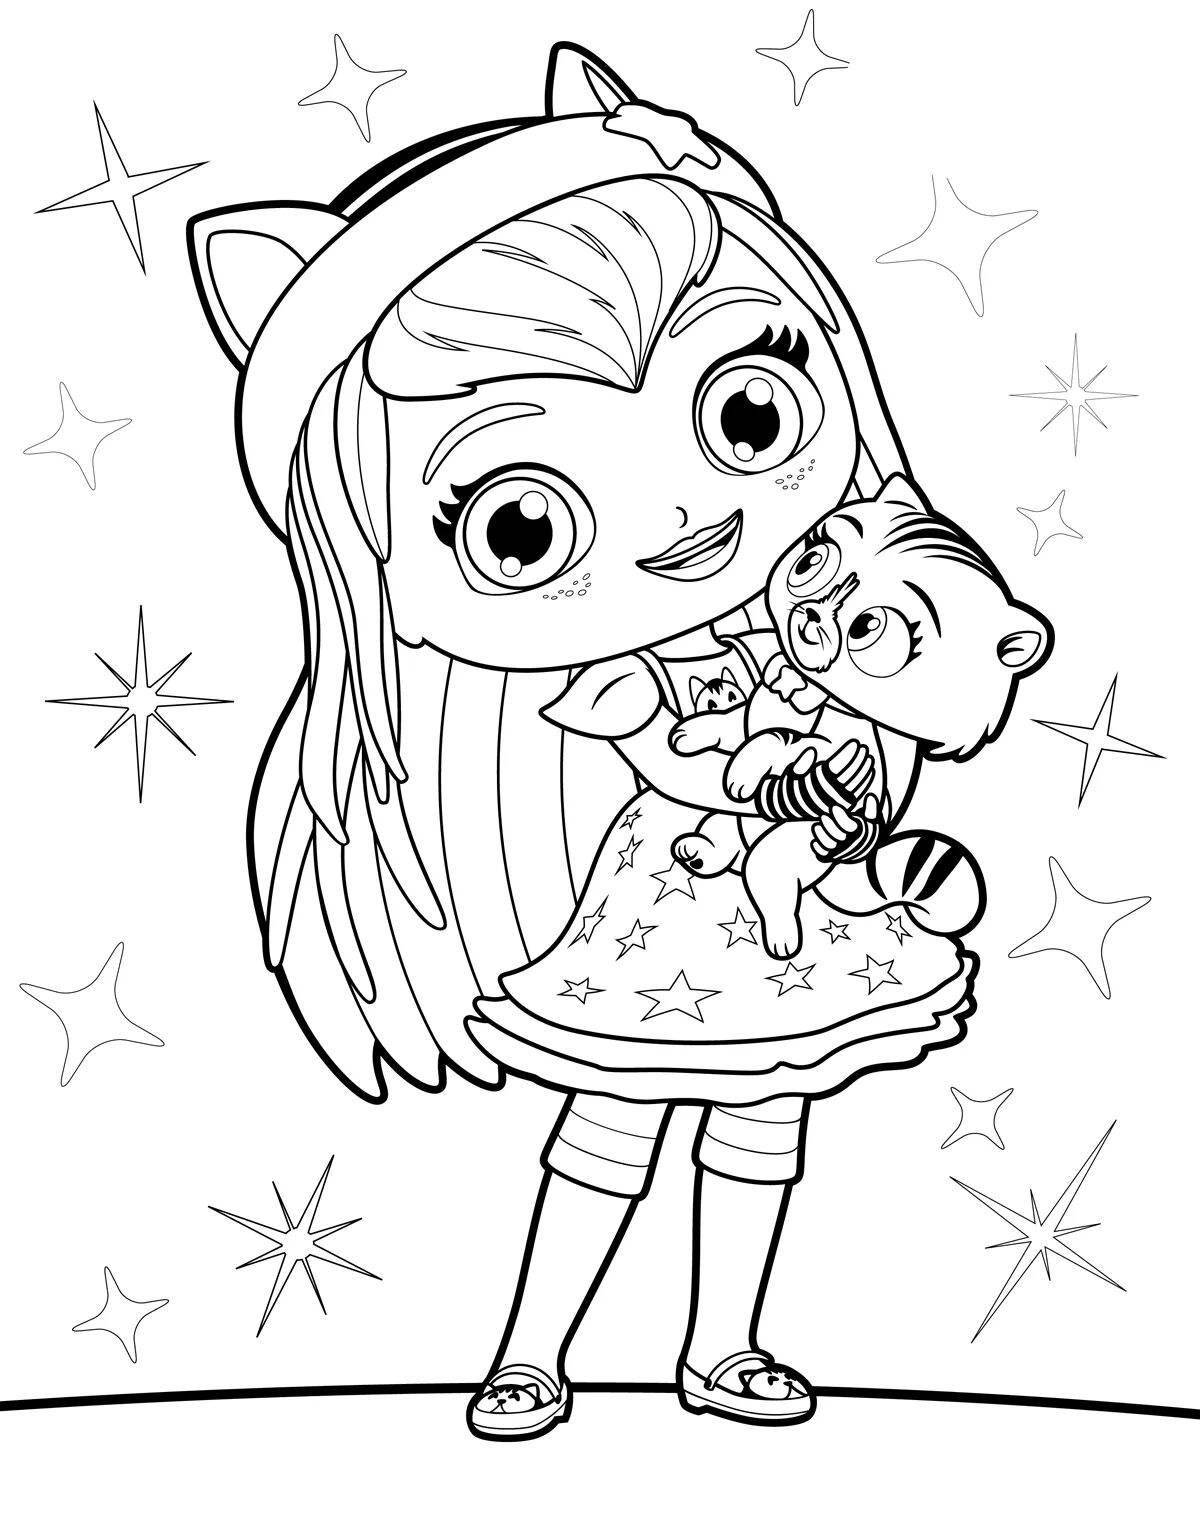 Coloring book for cartoon girls